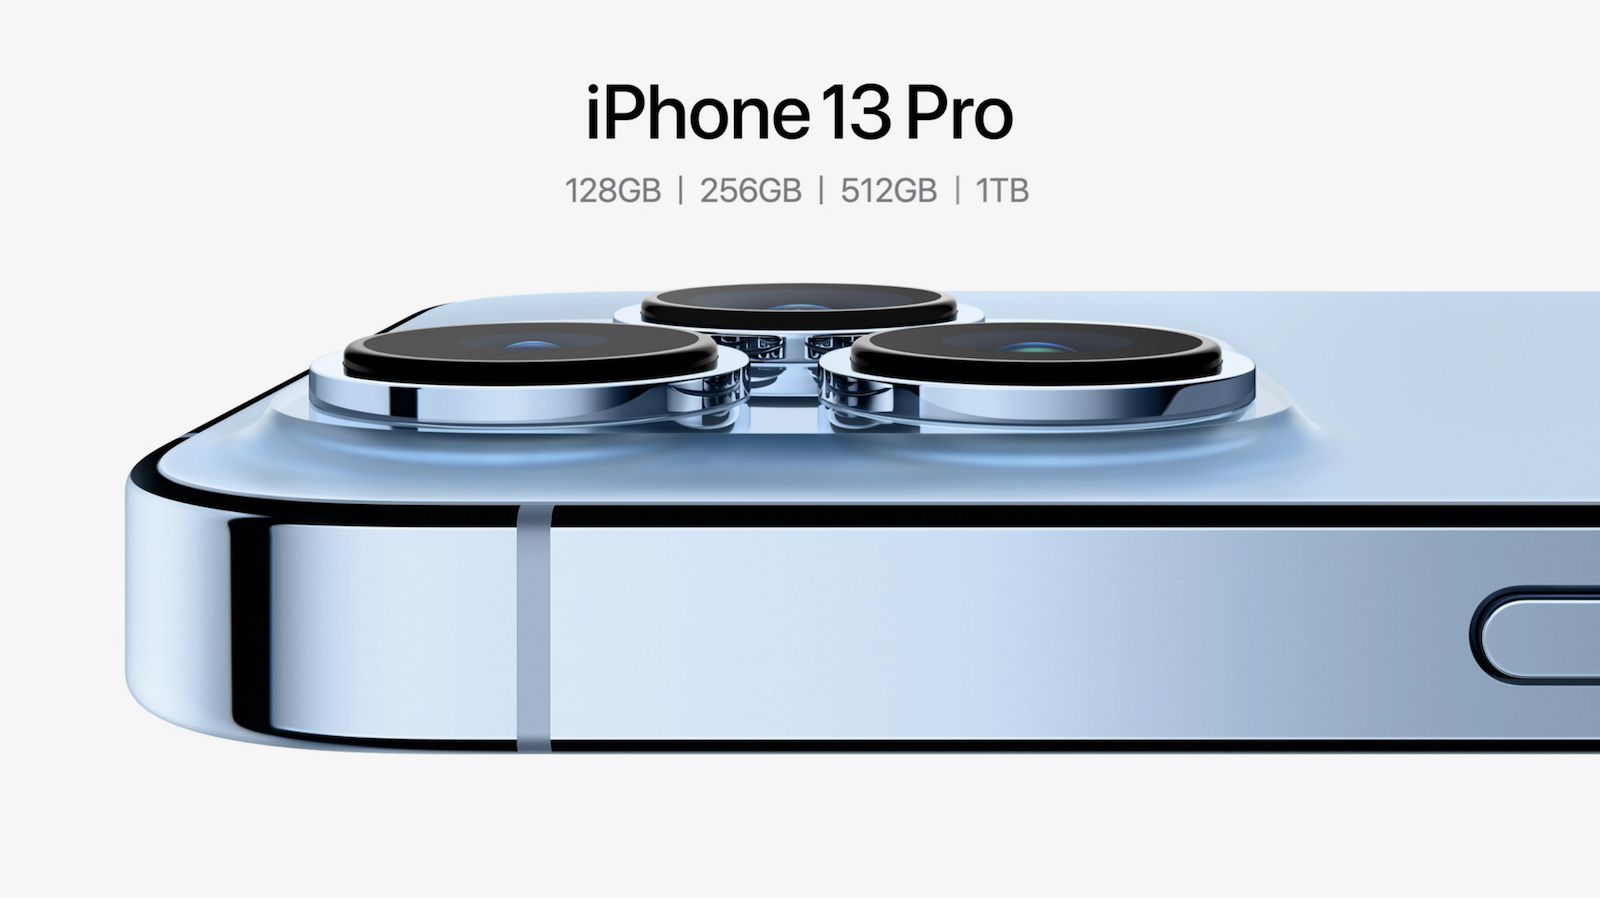 iPhone 13 Pro's New 1TB Storage Option Already Facing Delivery